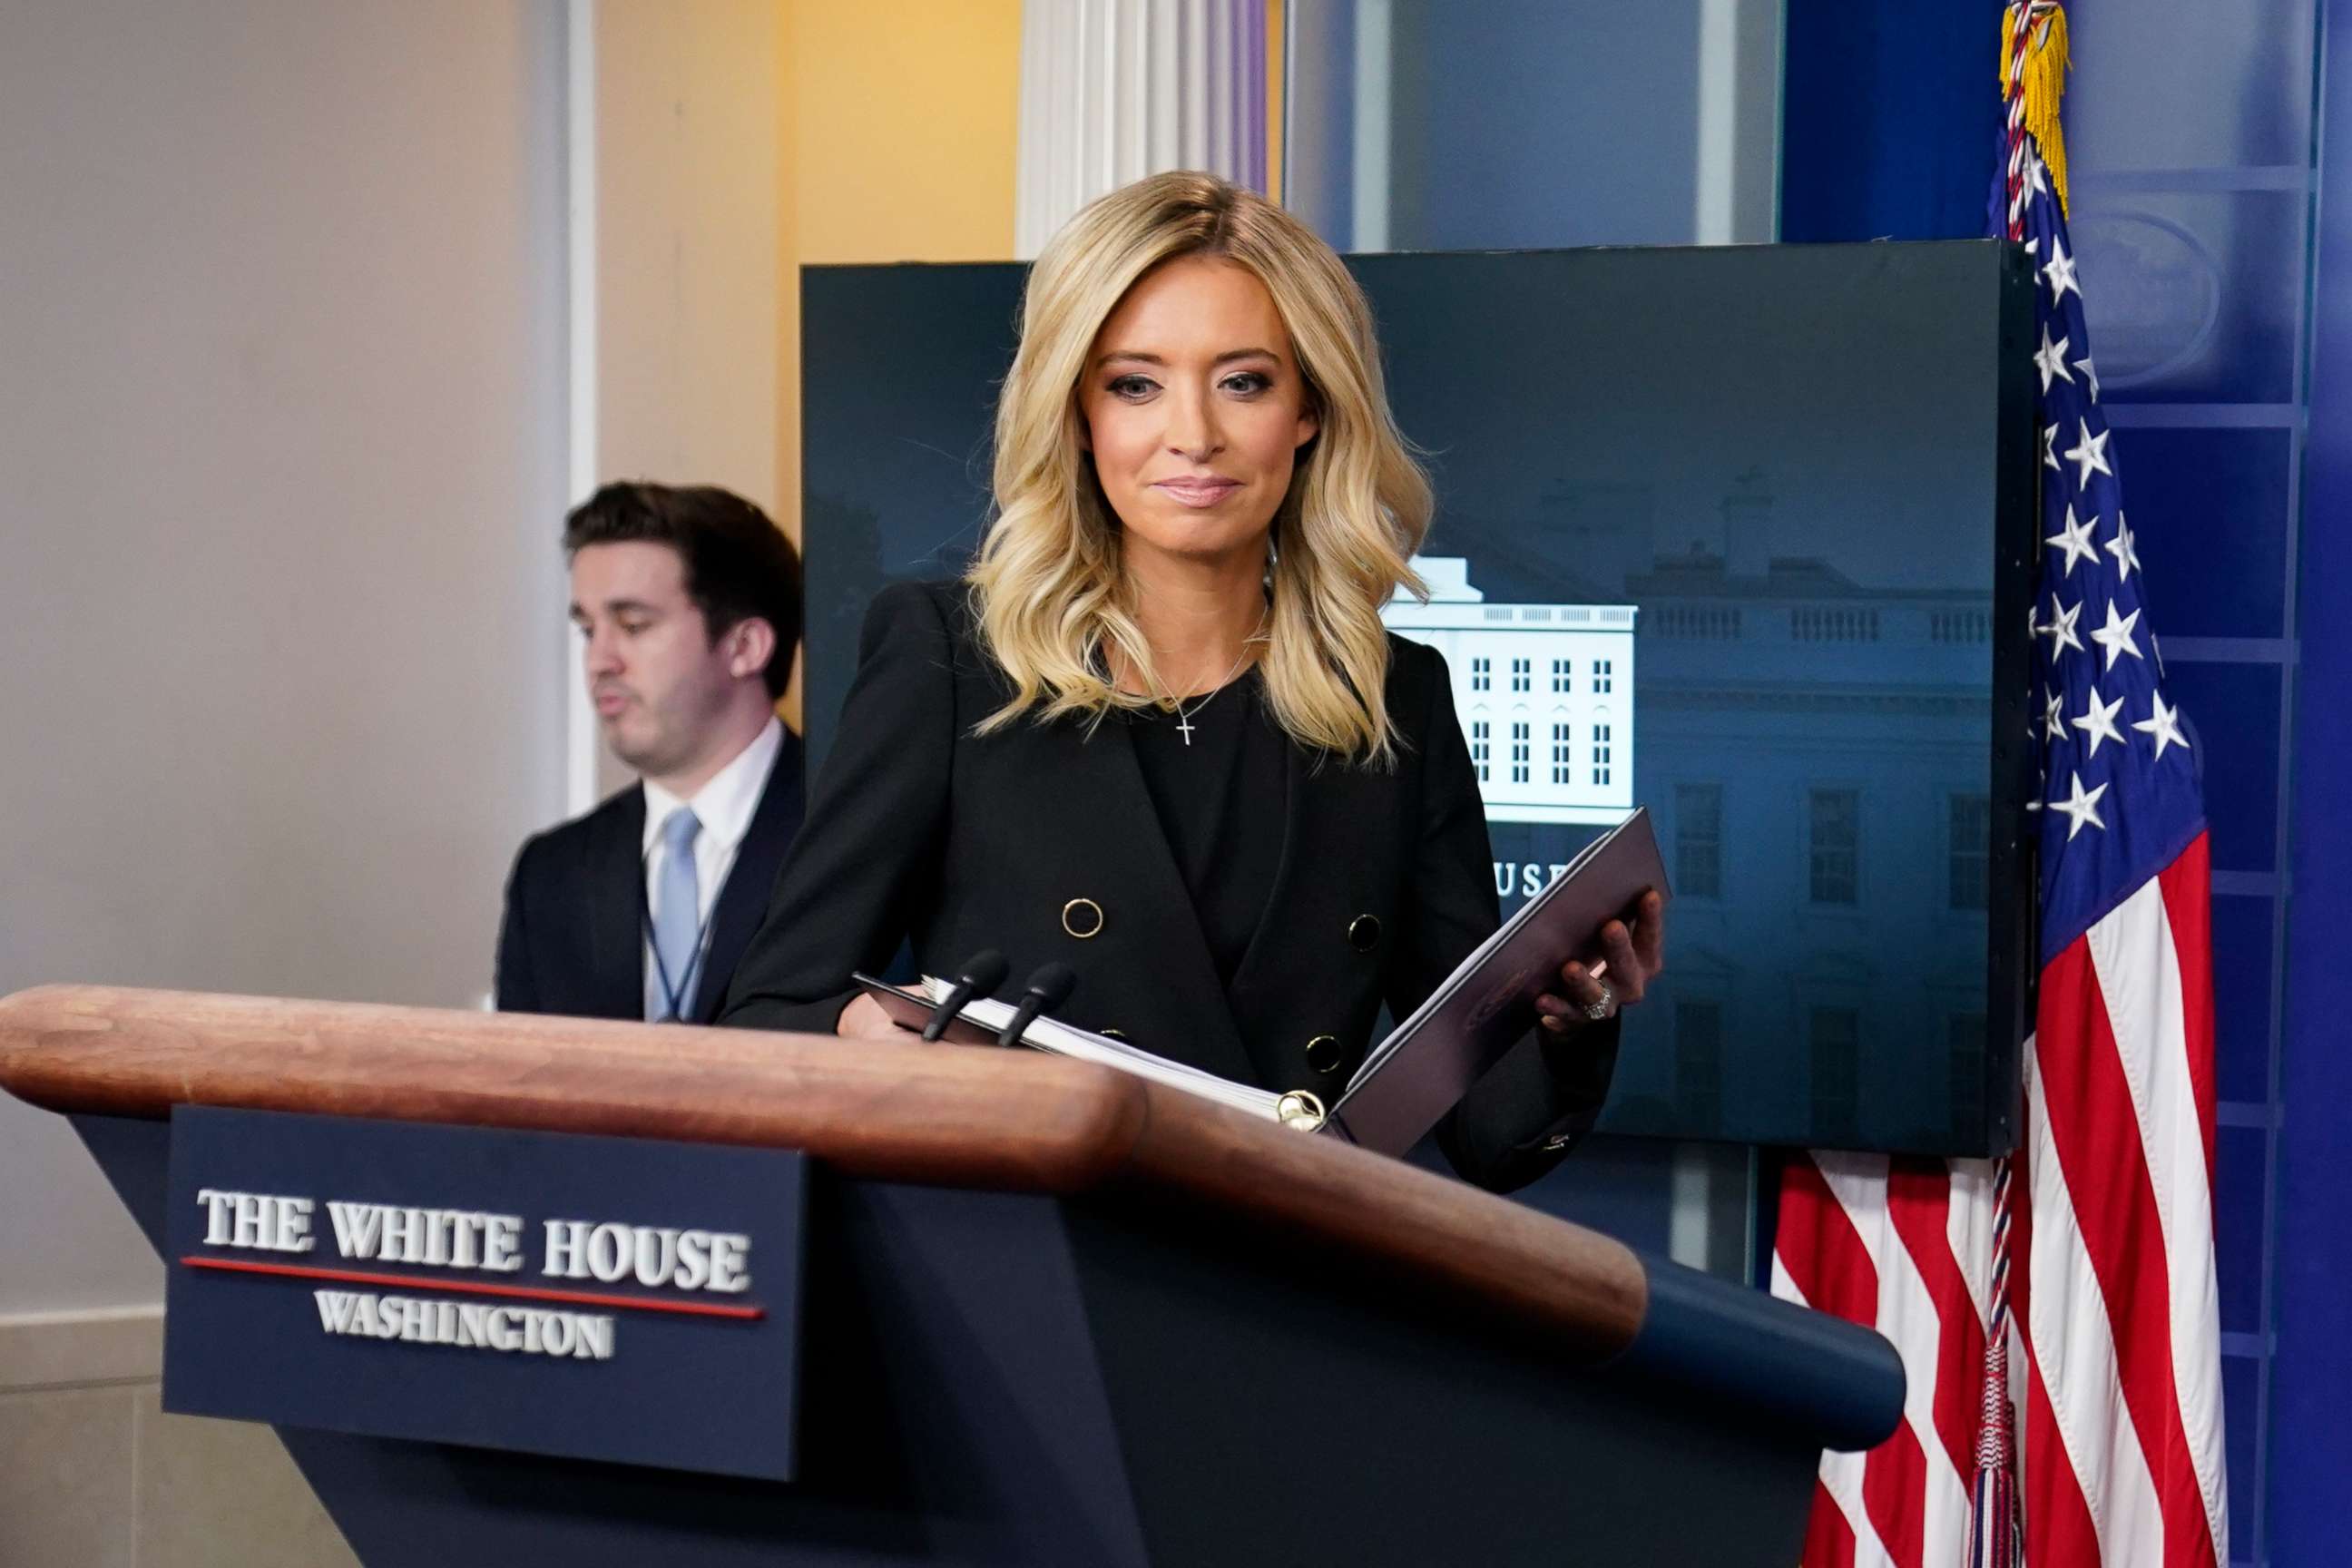 PHOTO: White House press secretary Kayleigh McEnany arrives to speak during a press briefing at the White House, May 1, 2020, in Washington.